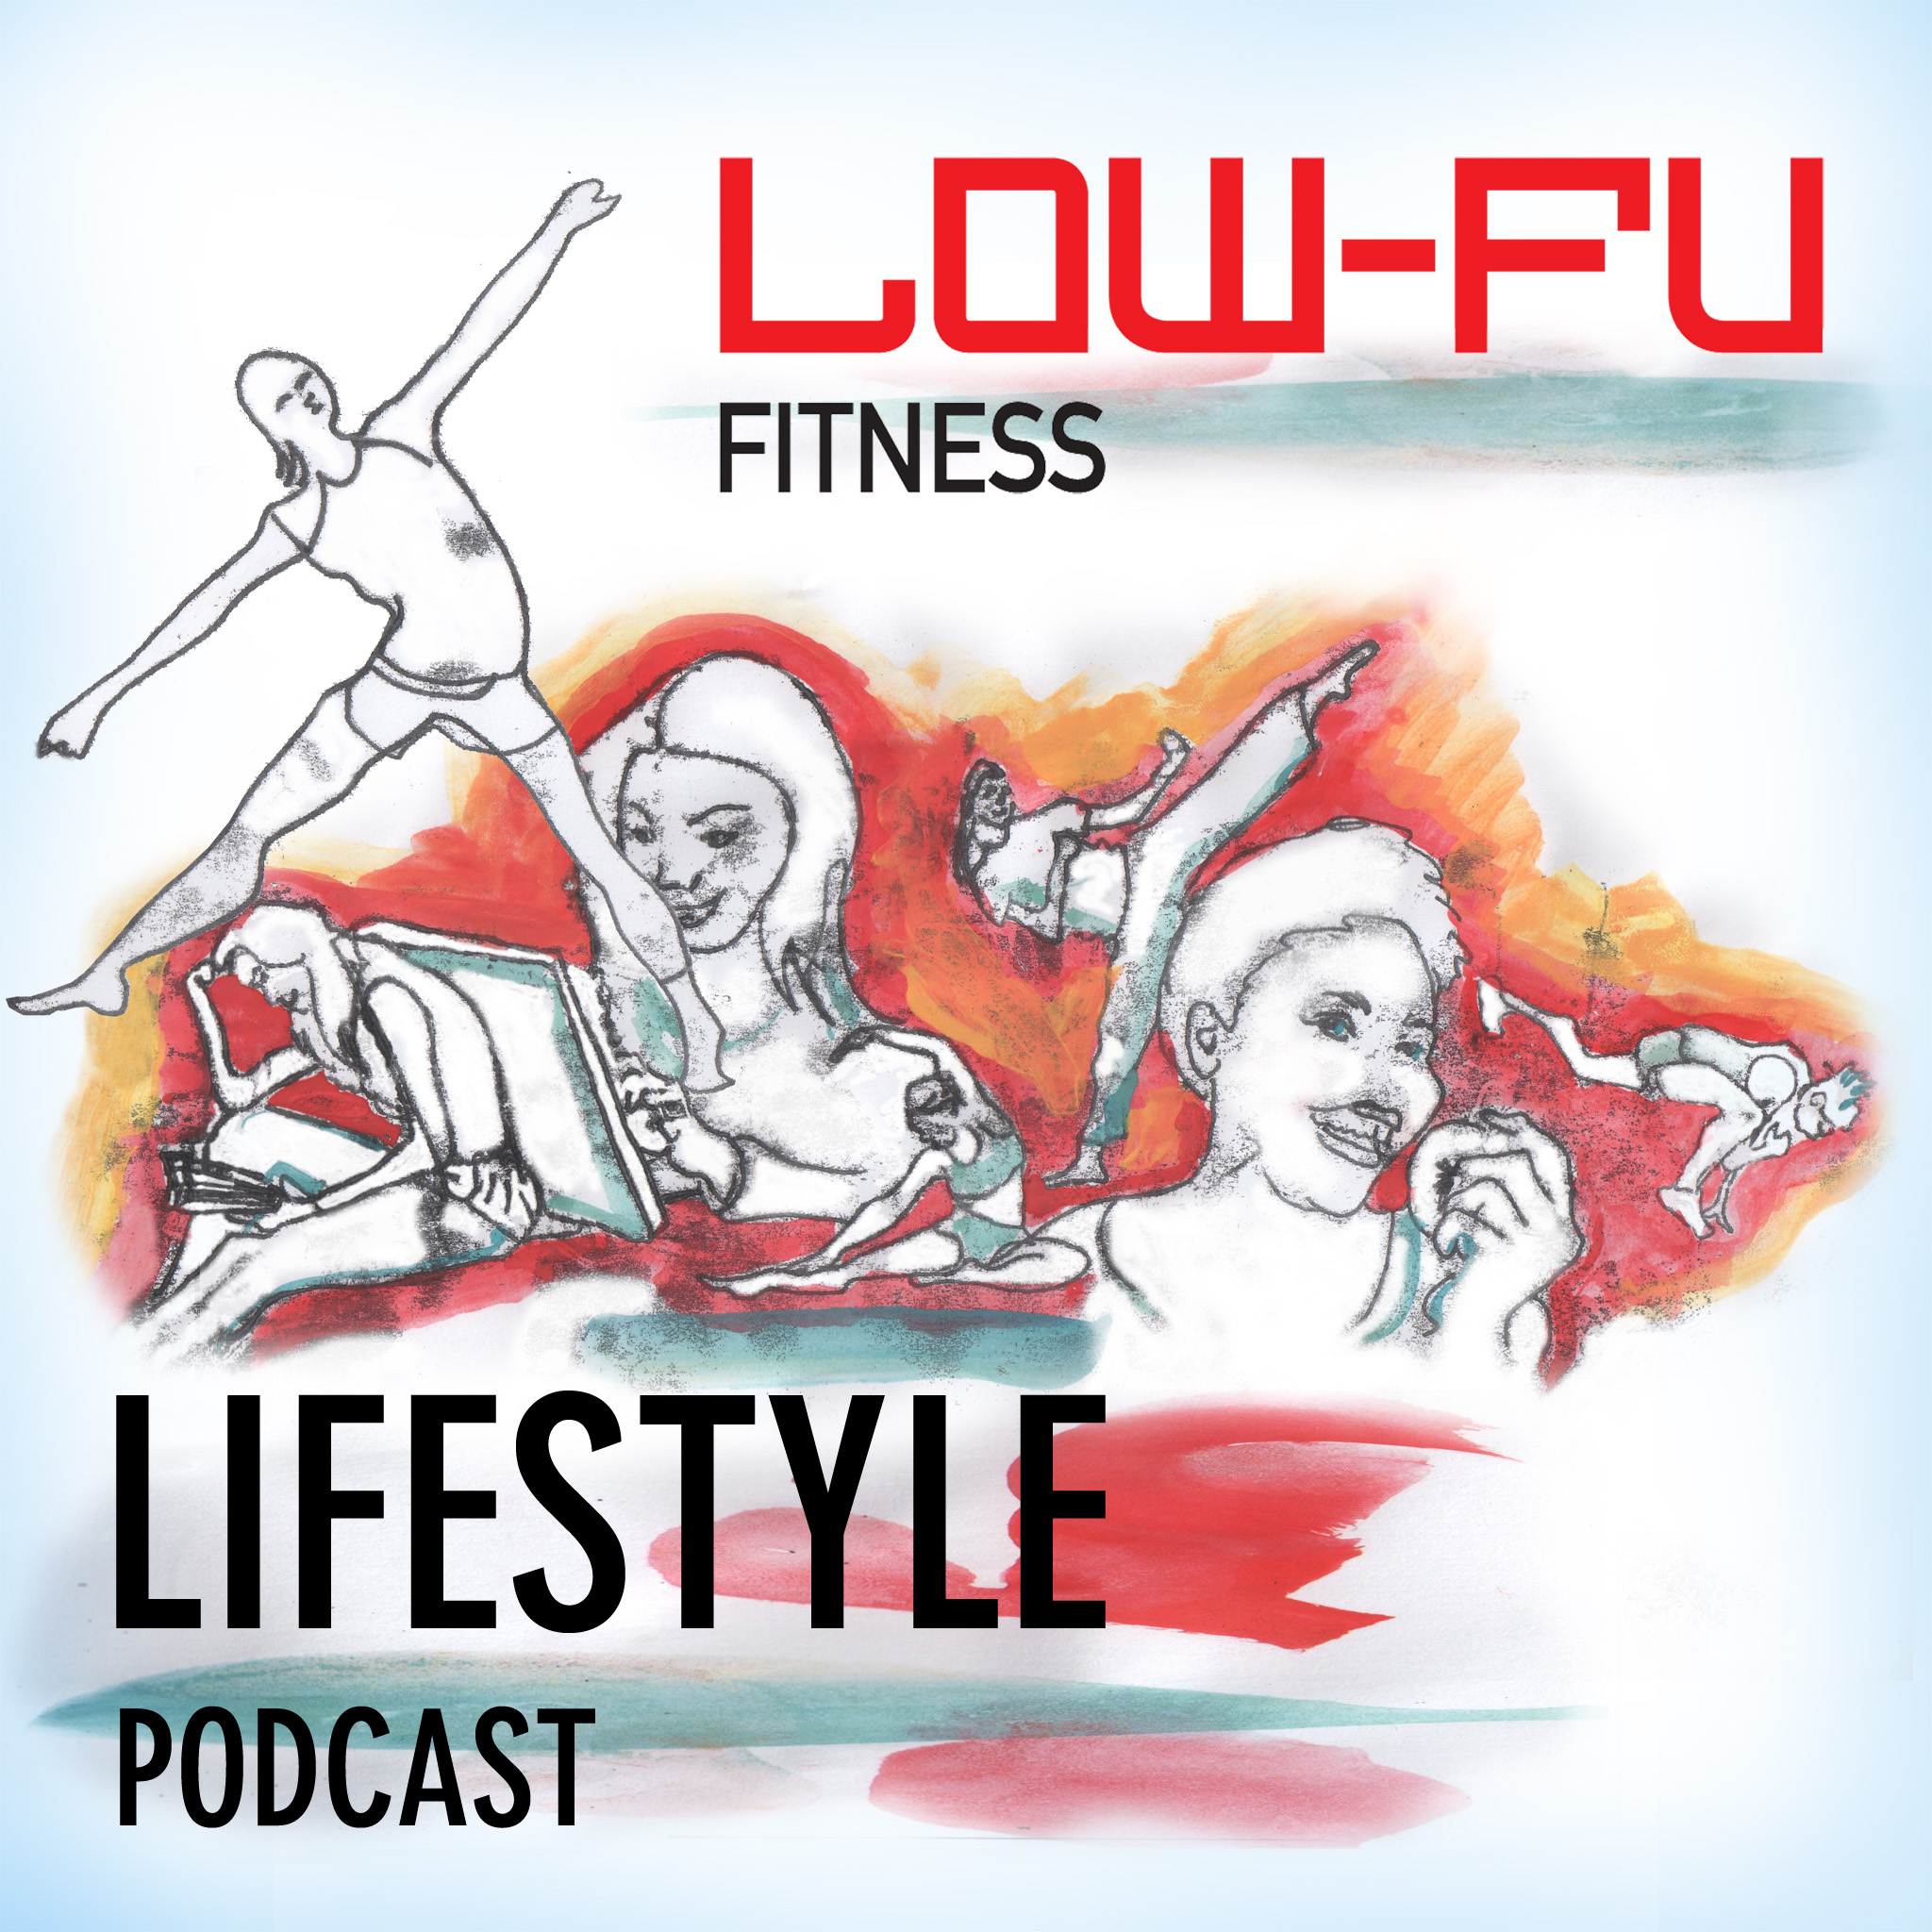 Episode 3: interact with Low Fu on social media